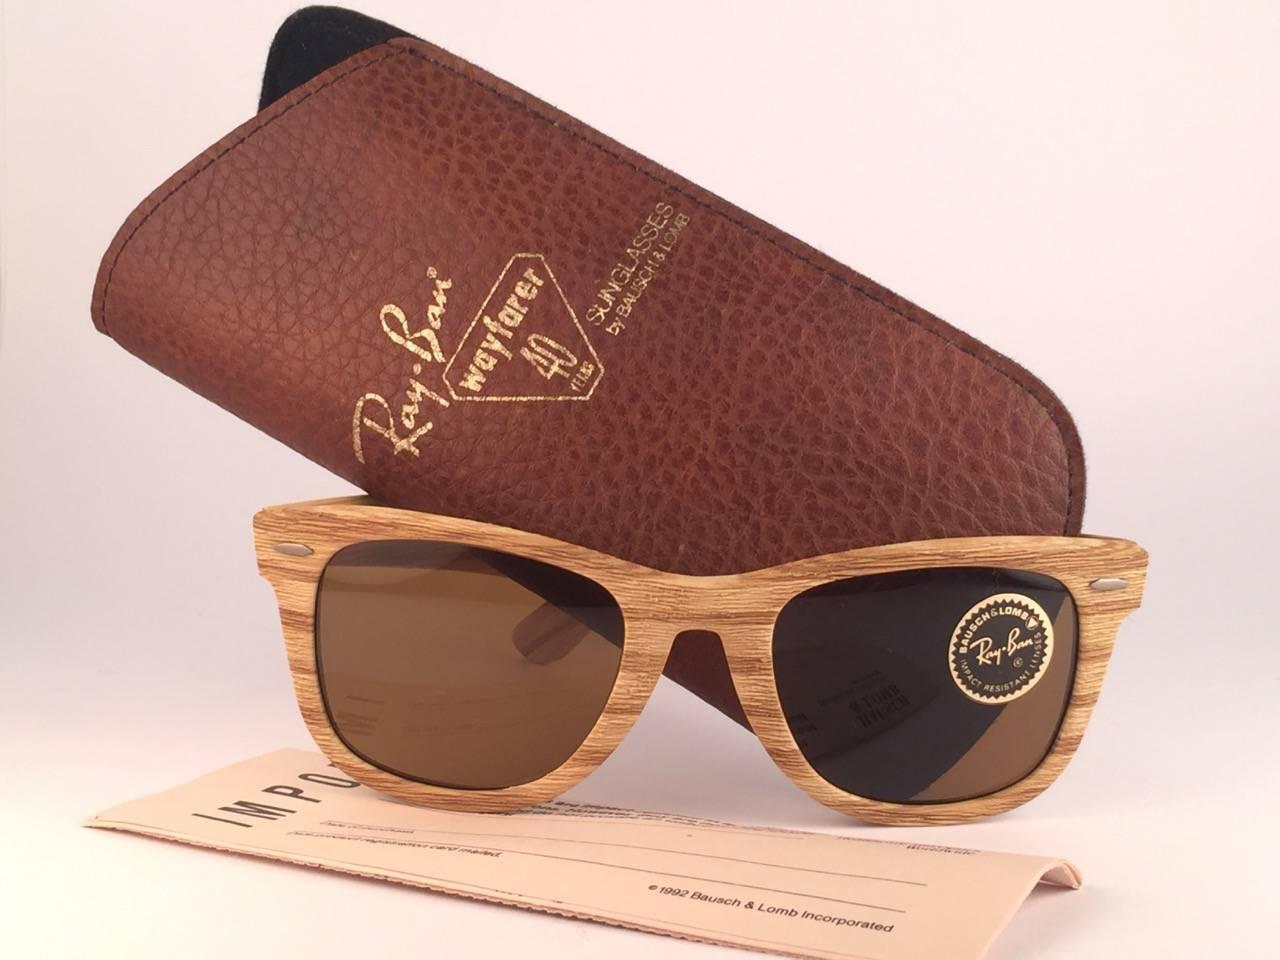 
New and Rare collectors item the ultra rare edition of the classic Wayfarer: The Woodies. 
These were made in 3 colors, from light brown to dark brown. These are the light driftwood edition. Sporting B15 grey lenses. 5022, the classic size. 
Frame